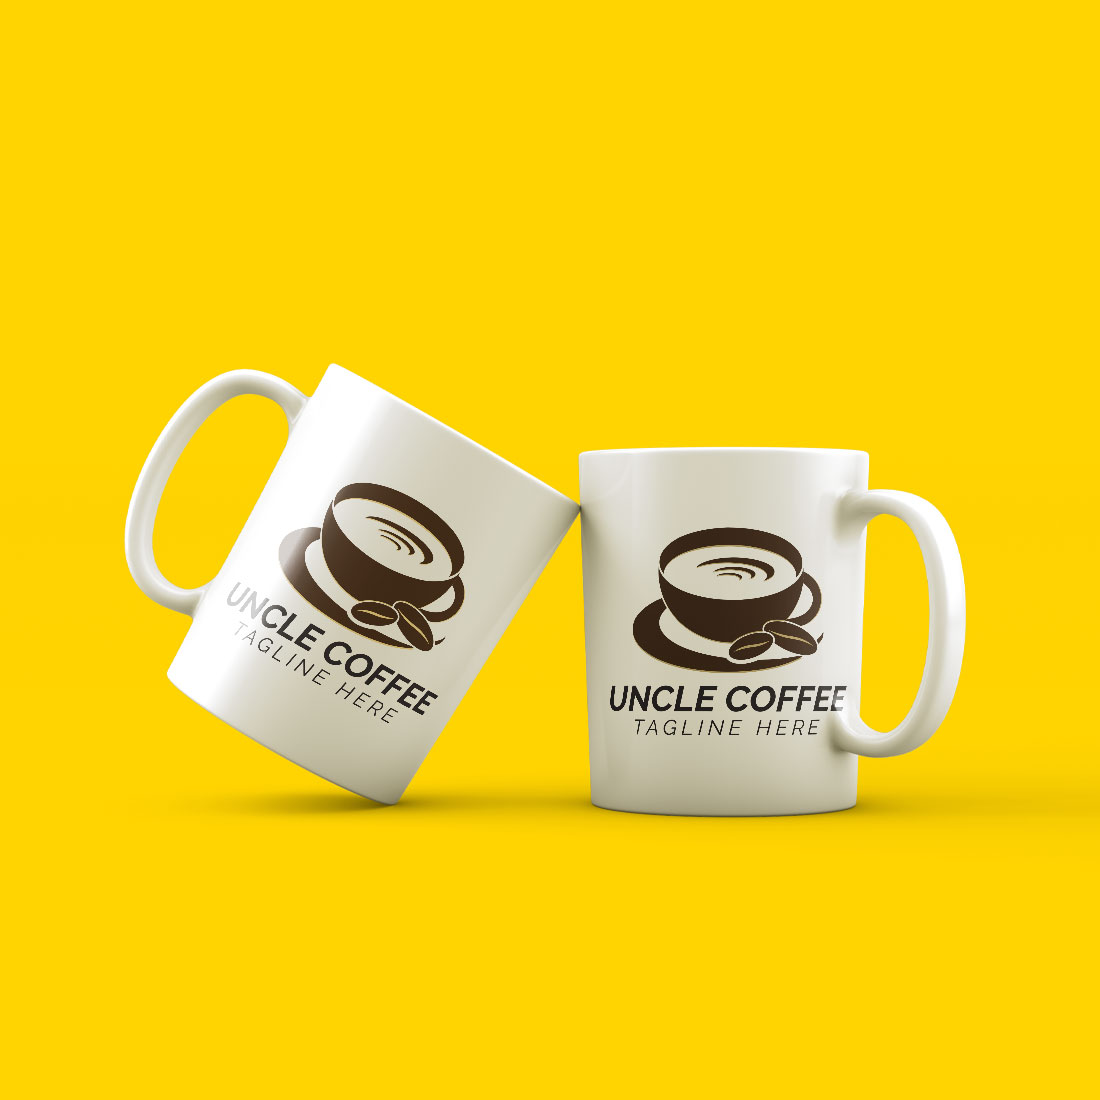 Uncle Coffee cup and coffee beans logo cover image.